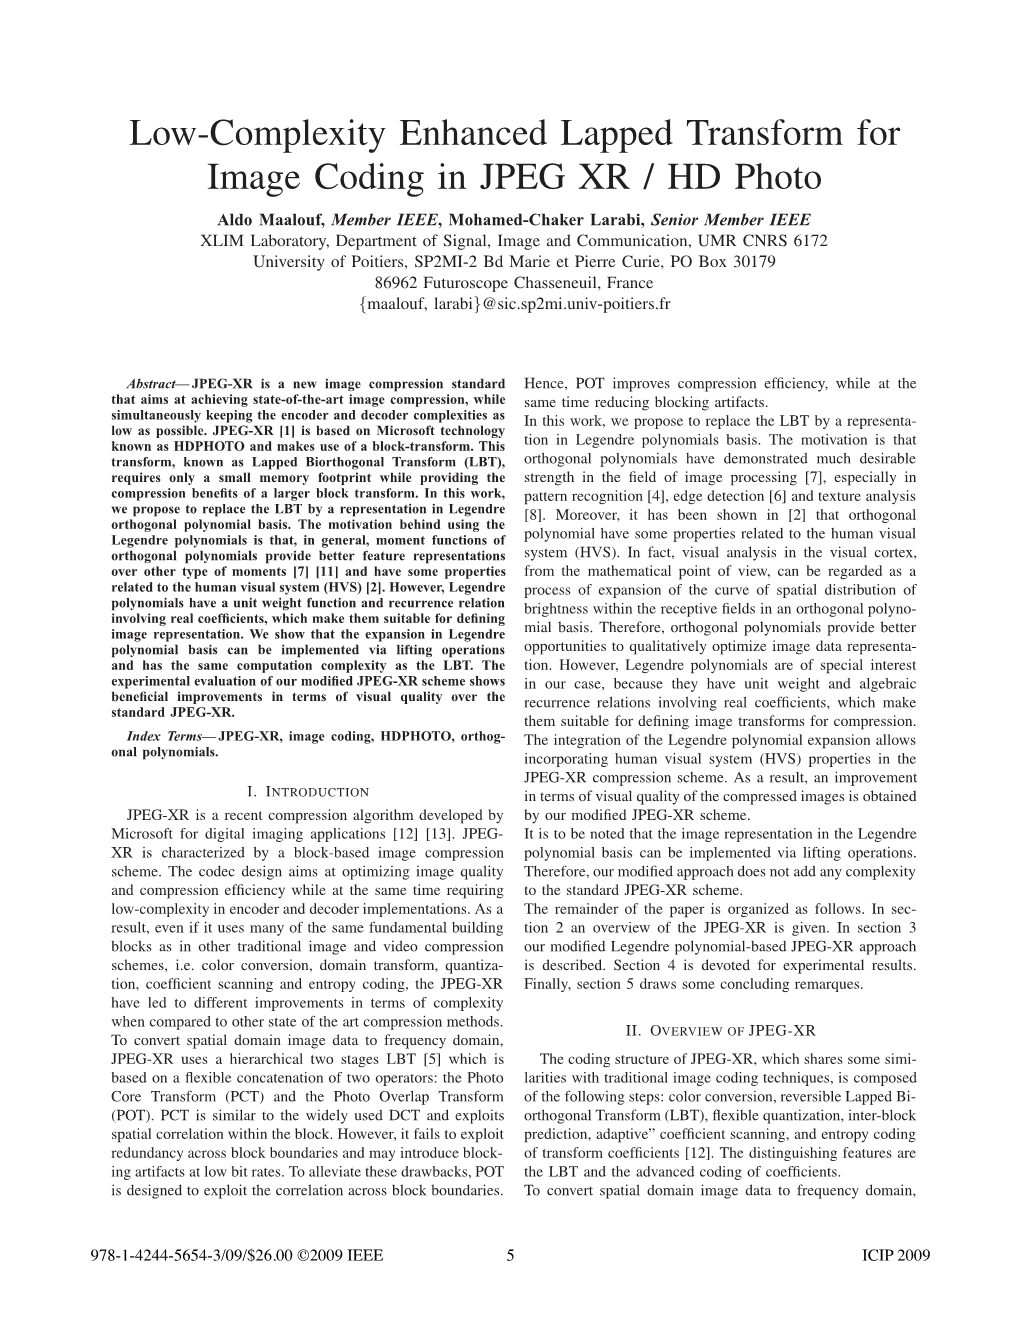 Low-Complexity Enhanced Lapped Transform for Image Coding in Jpeg